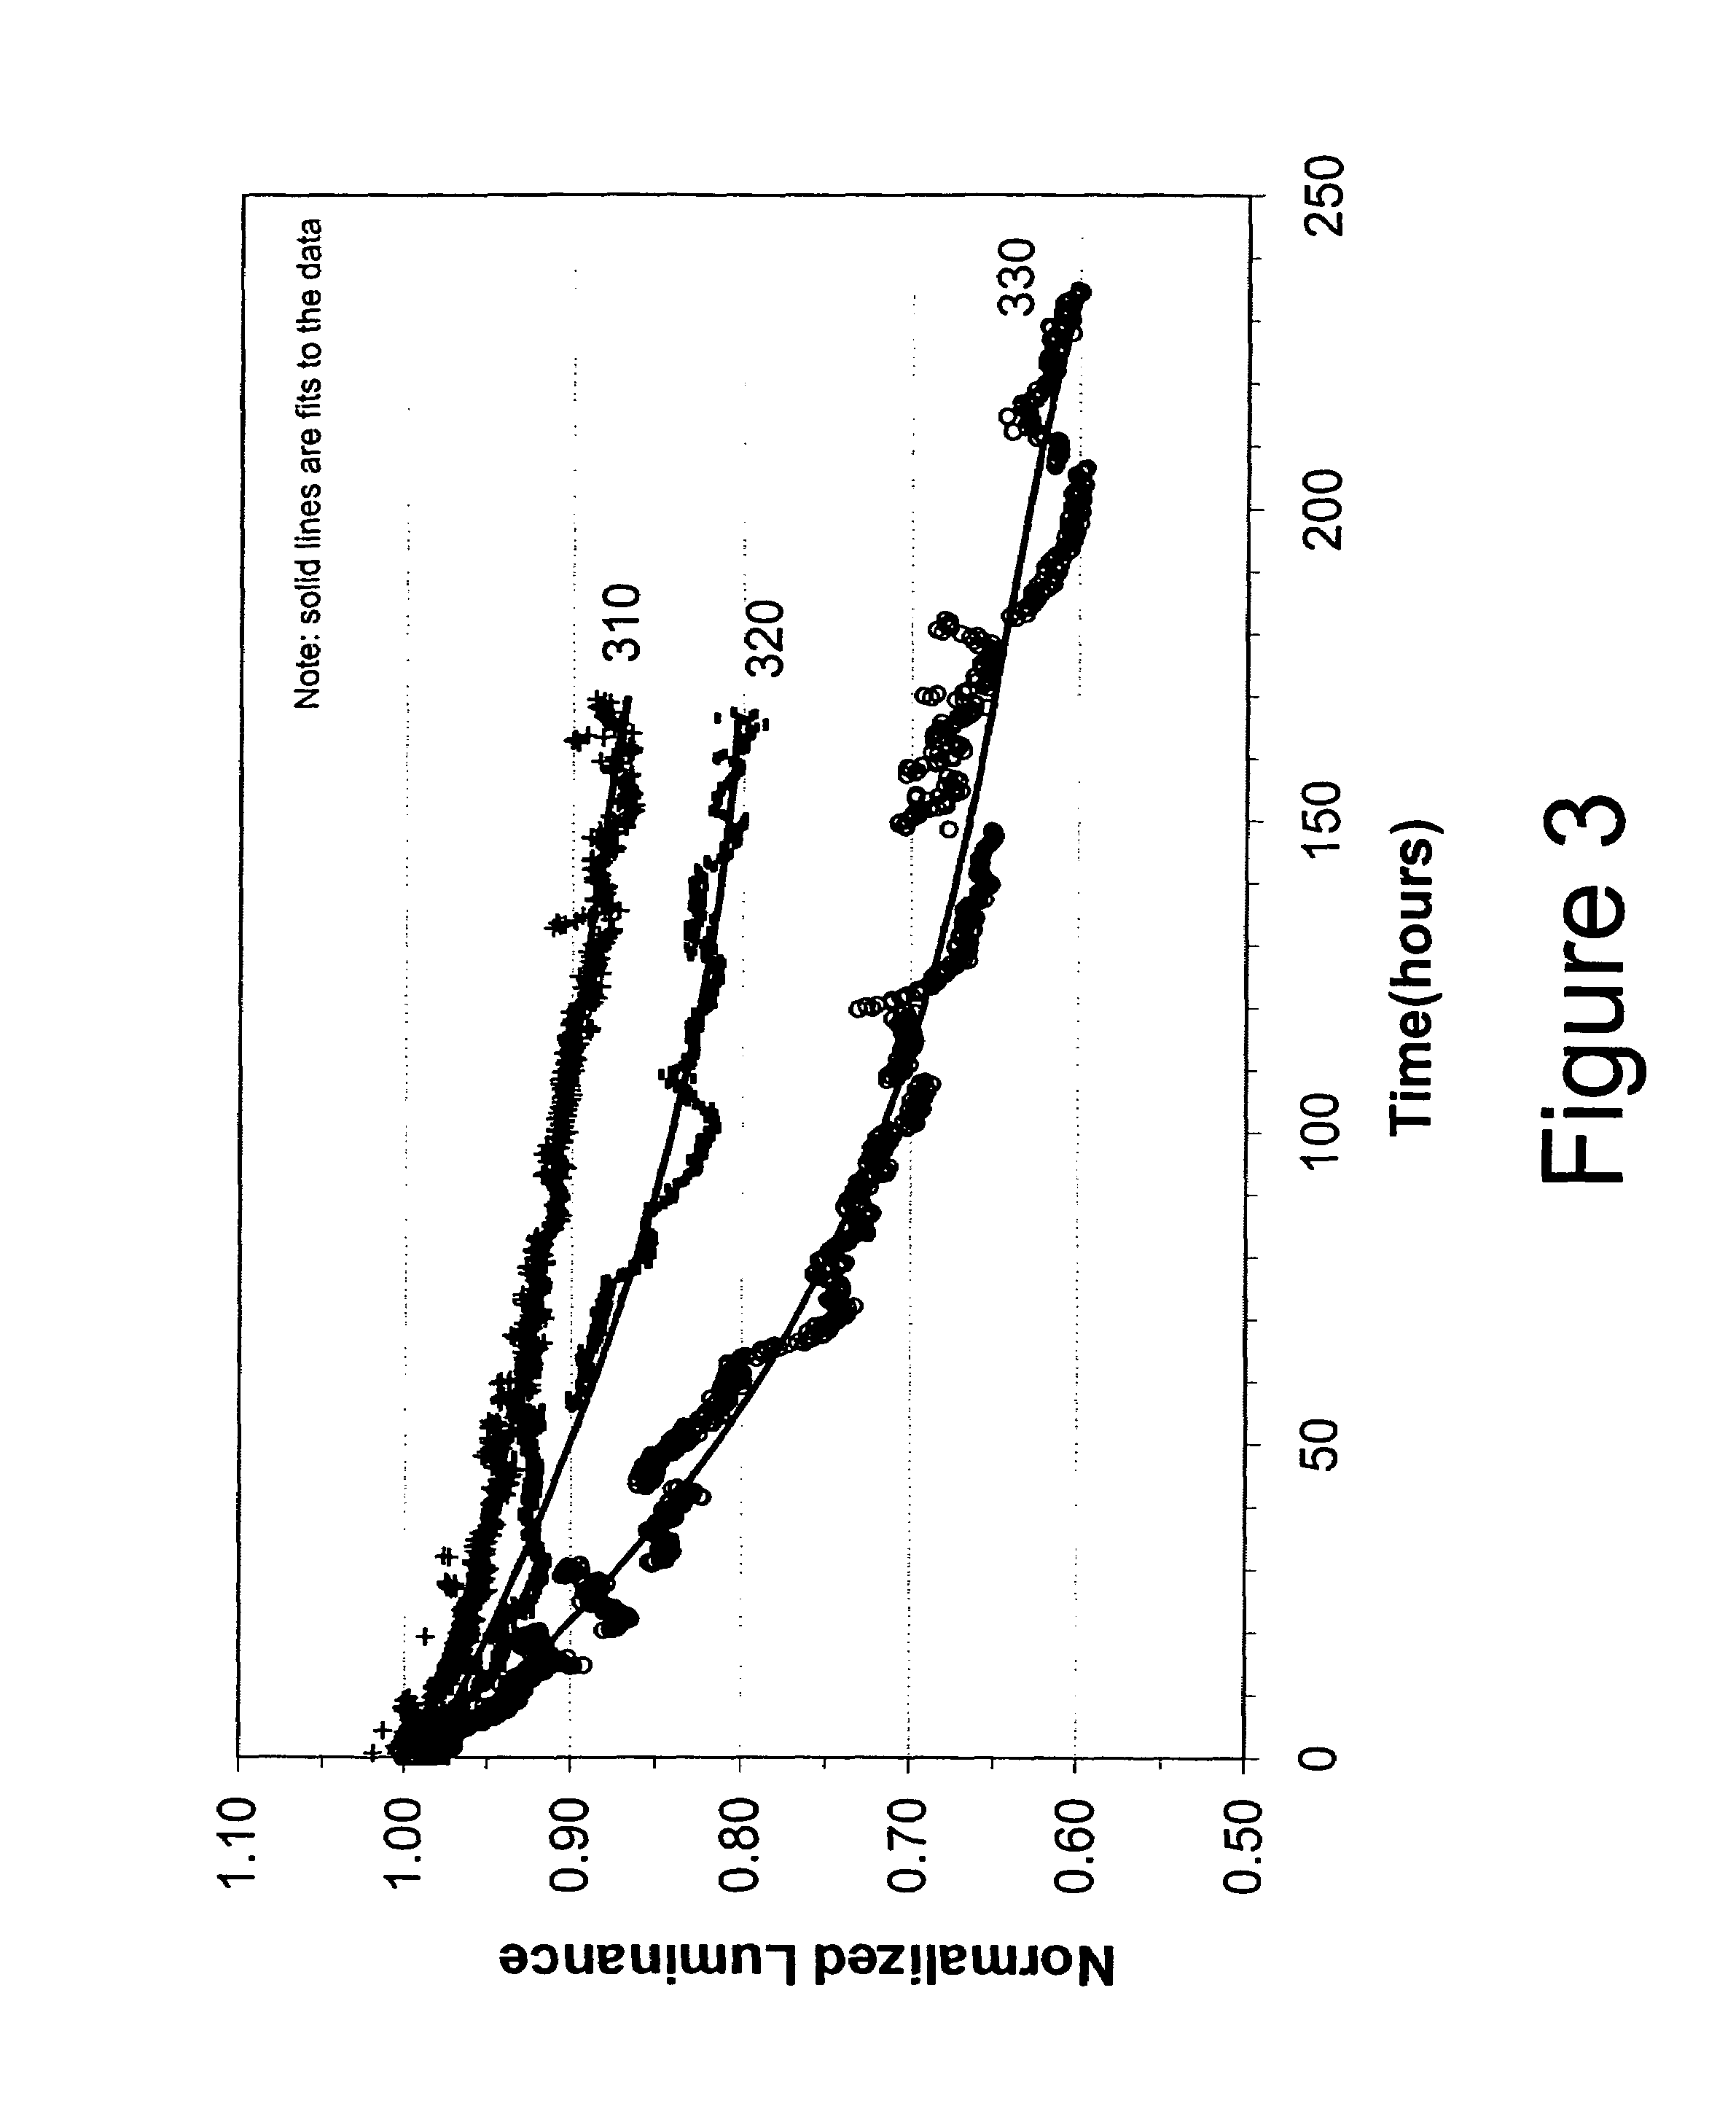 Organic light emitting materials and devices